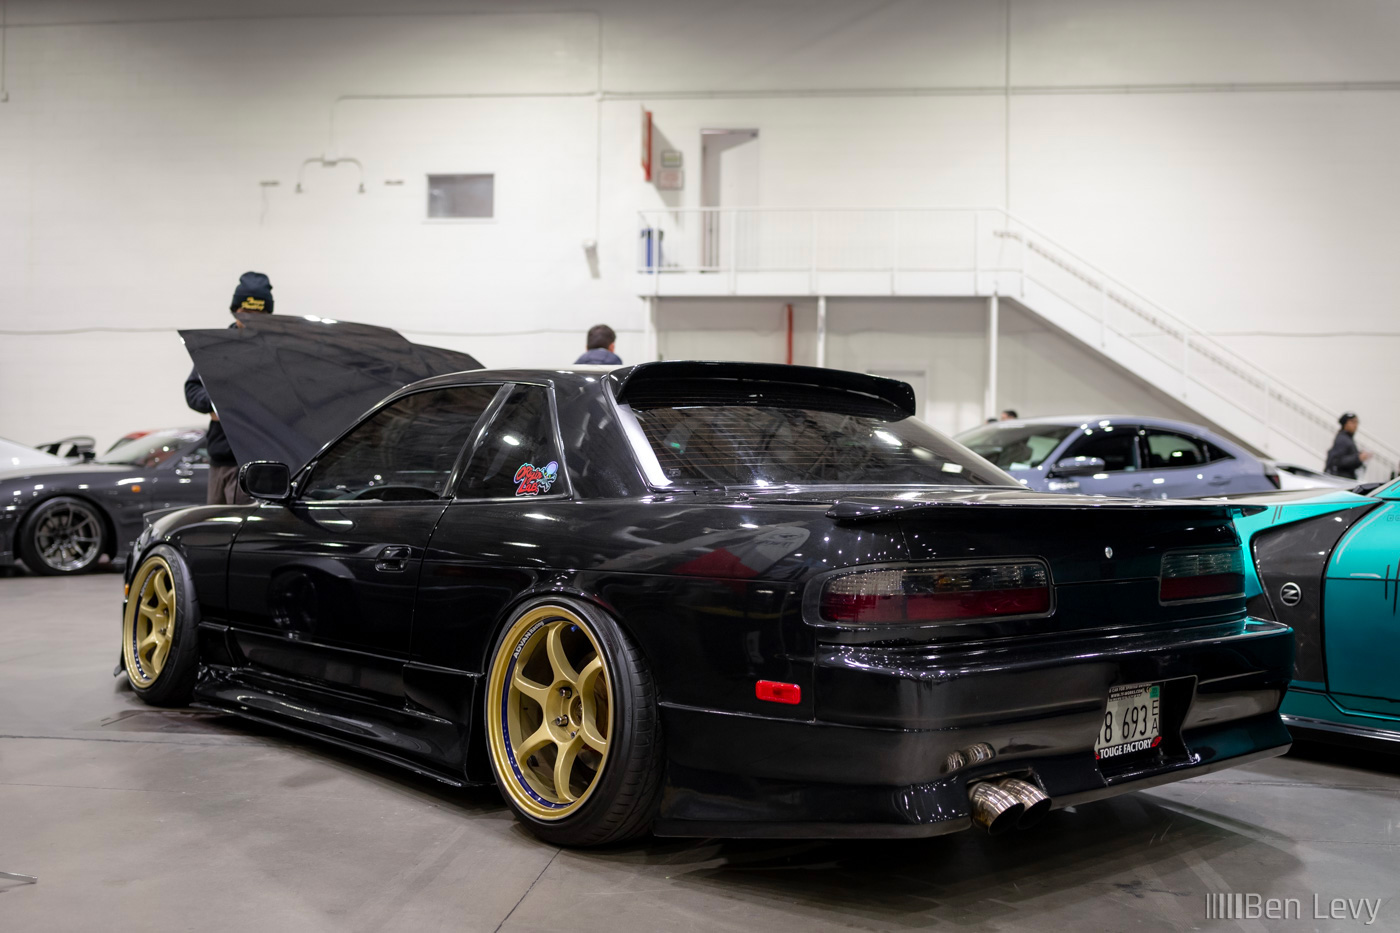 Black S13 240SX with Touge Factory Booth